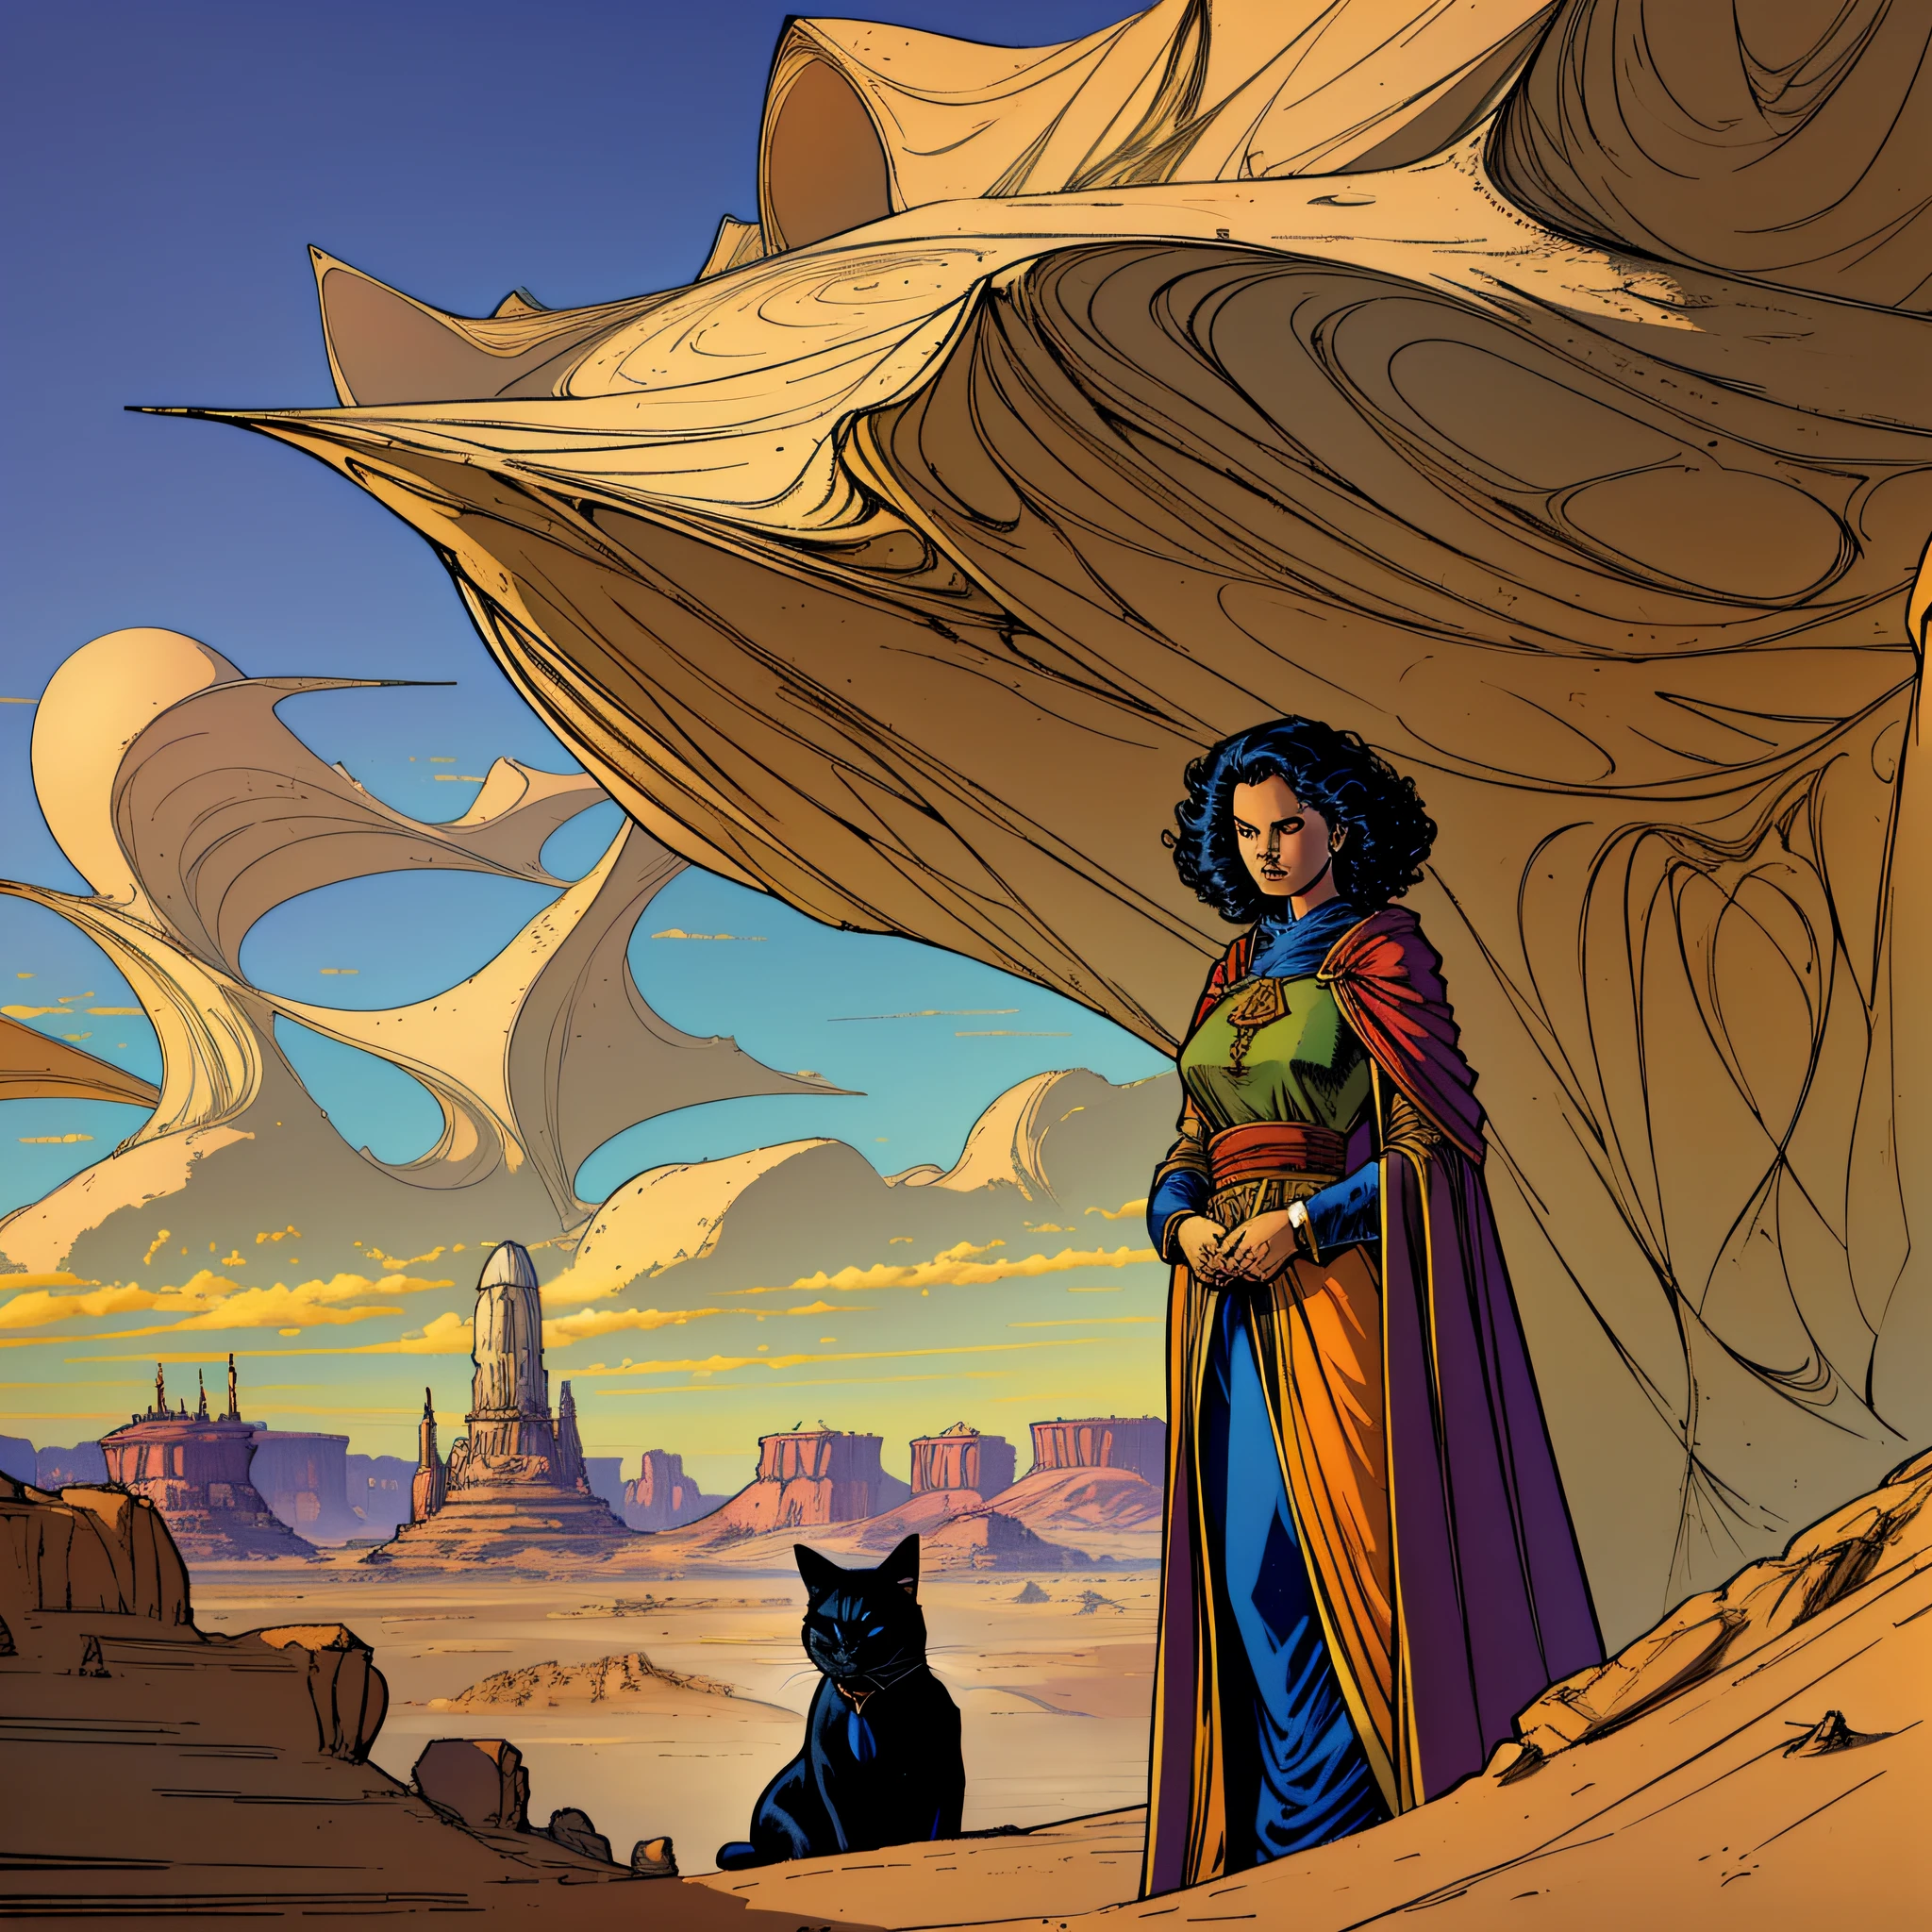 ((highest quality)), painting of a woman in a cloak with bob hair overlooking a desert landscape with a black cat, Mobius Jean Giraud, Pande Cine